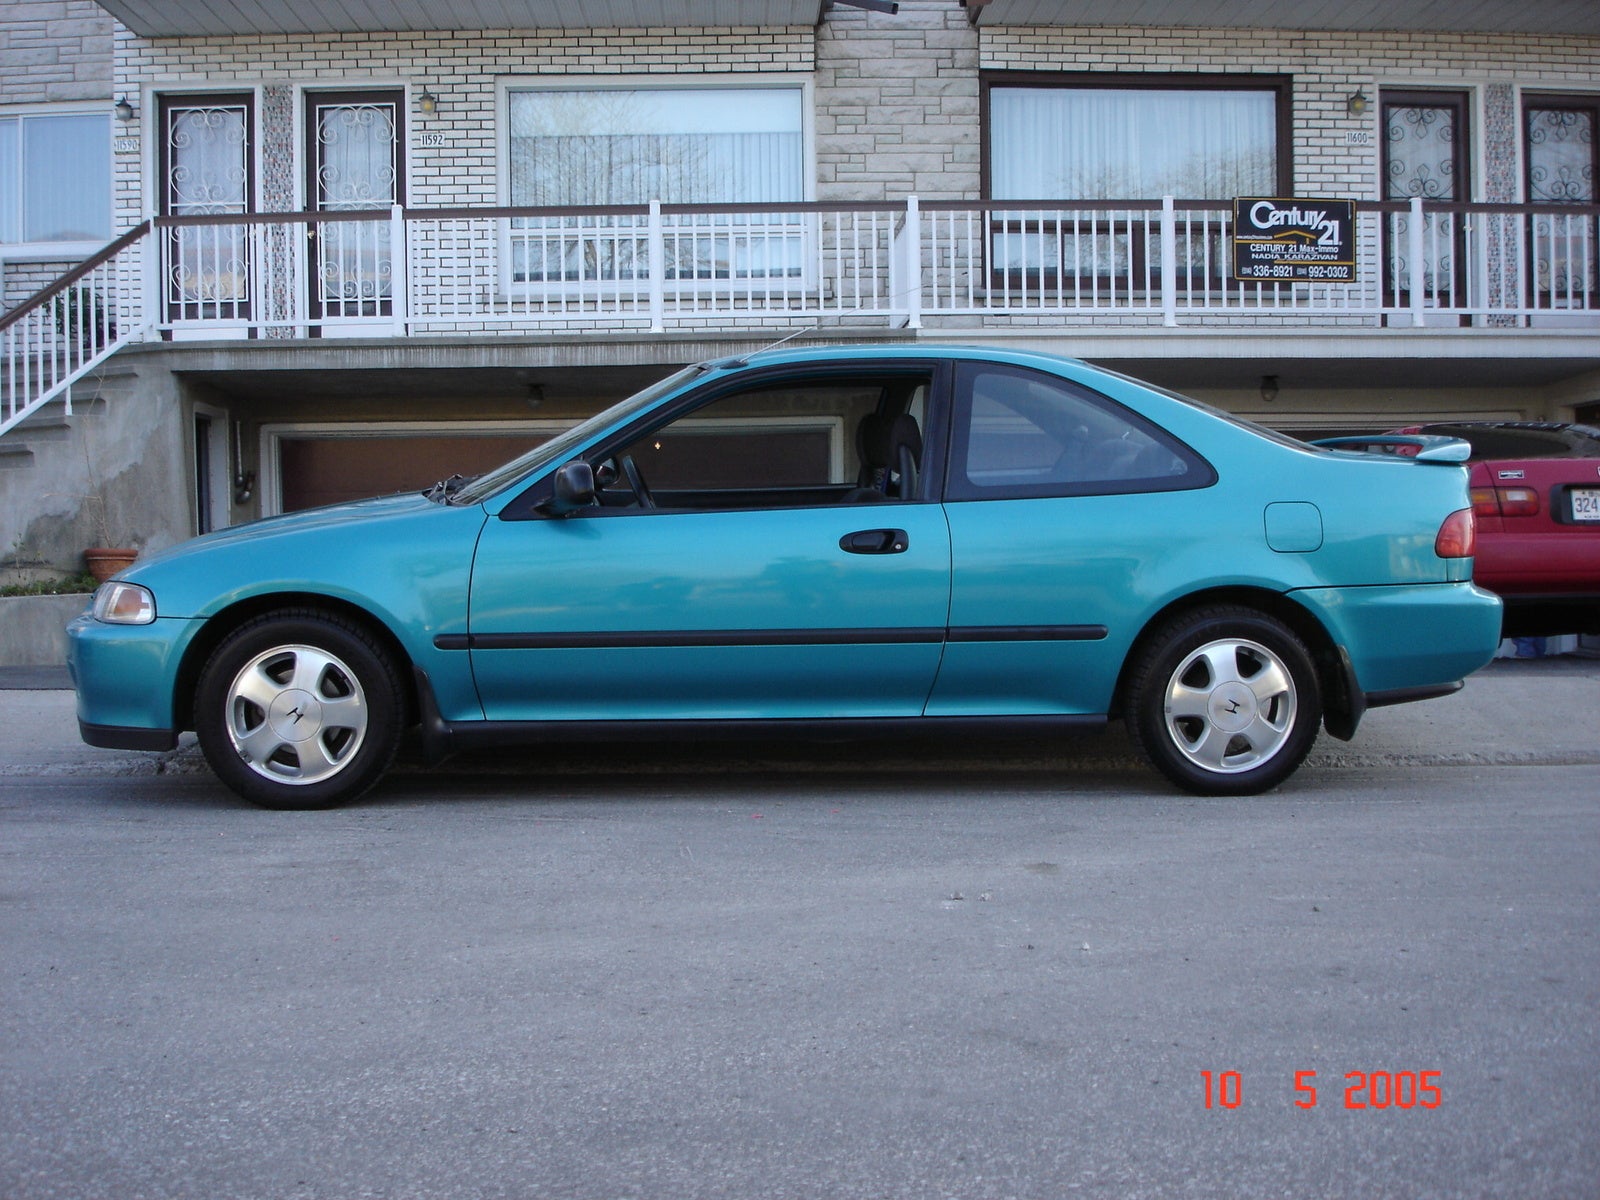 Pictures of a 1993 honda cvic coupe #1